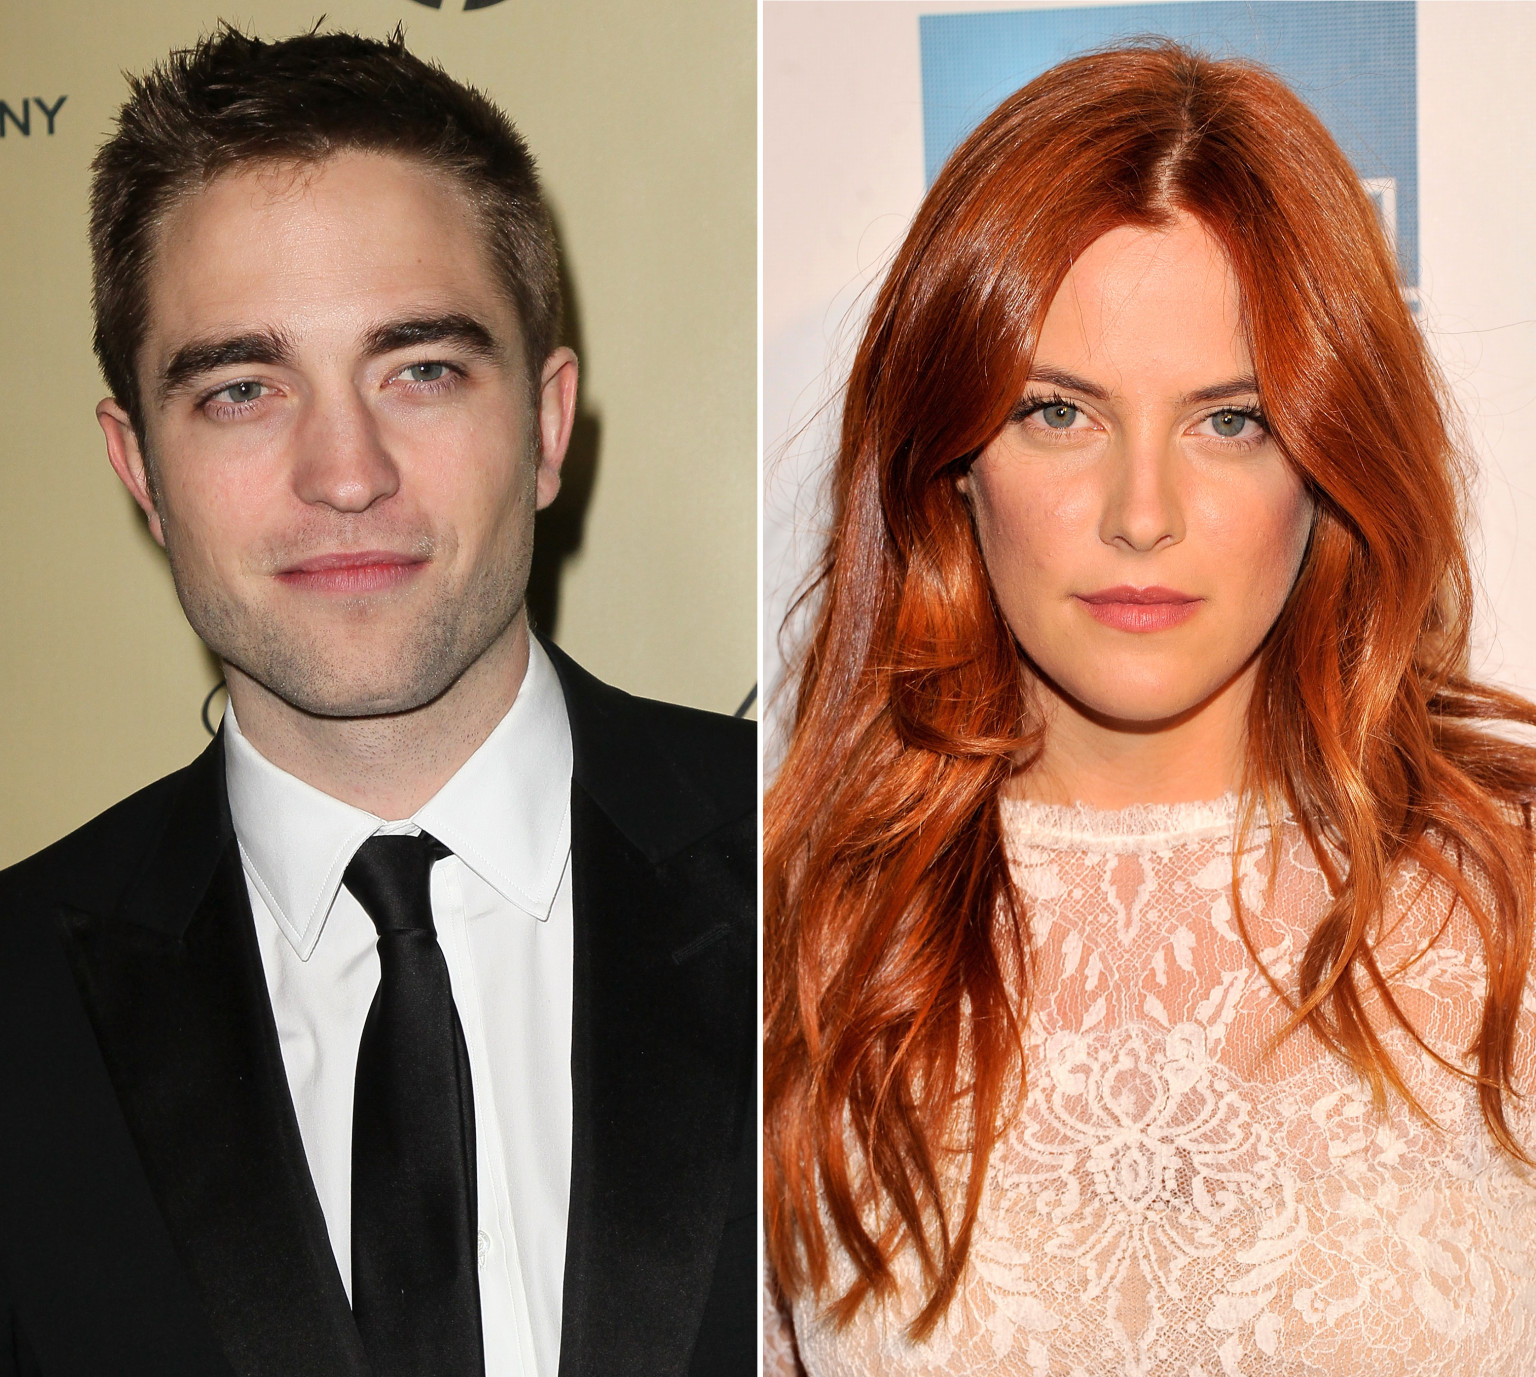 Who Is Robert Pattinson Dating Now 2013